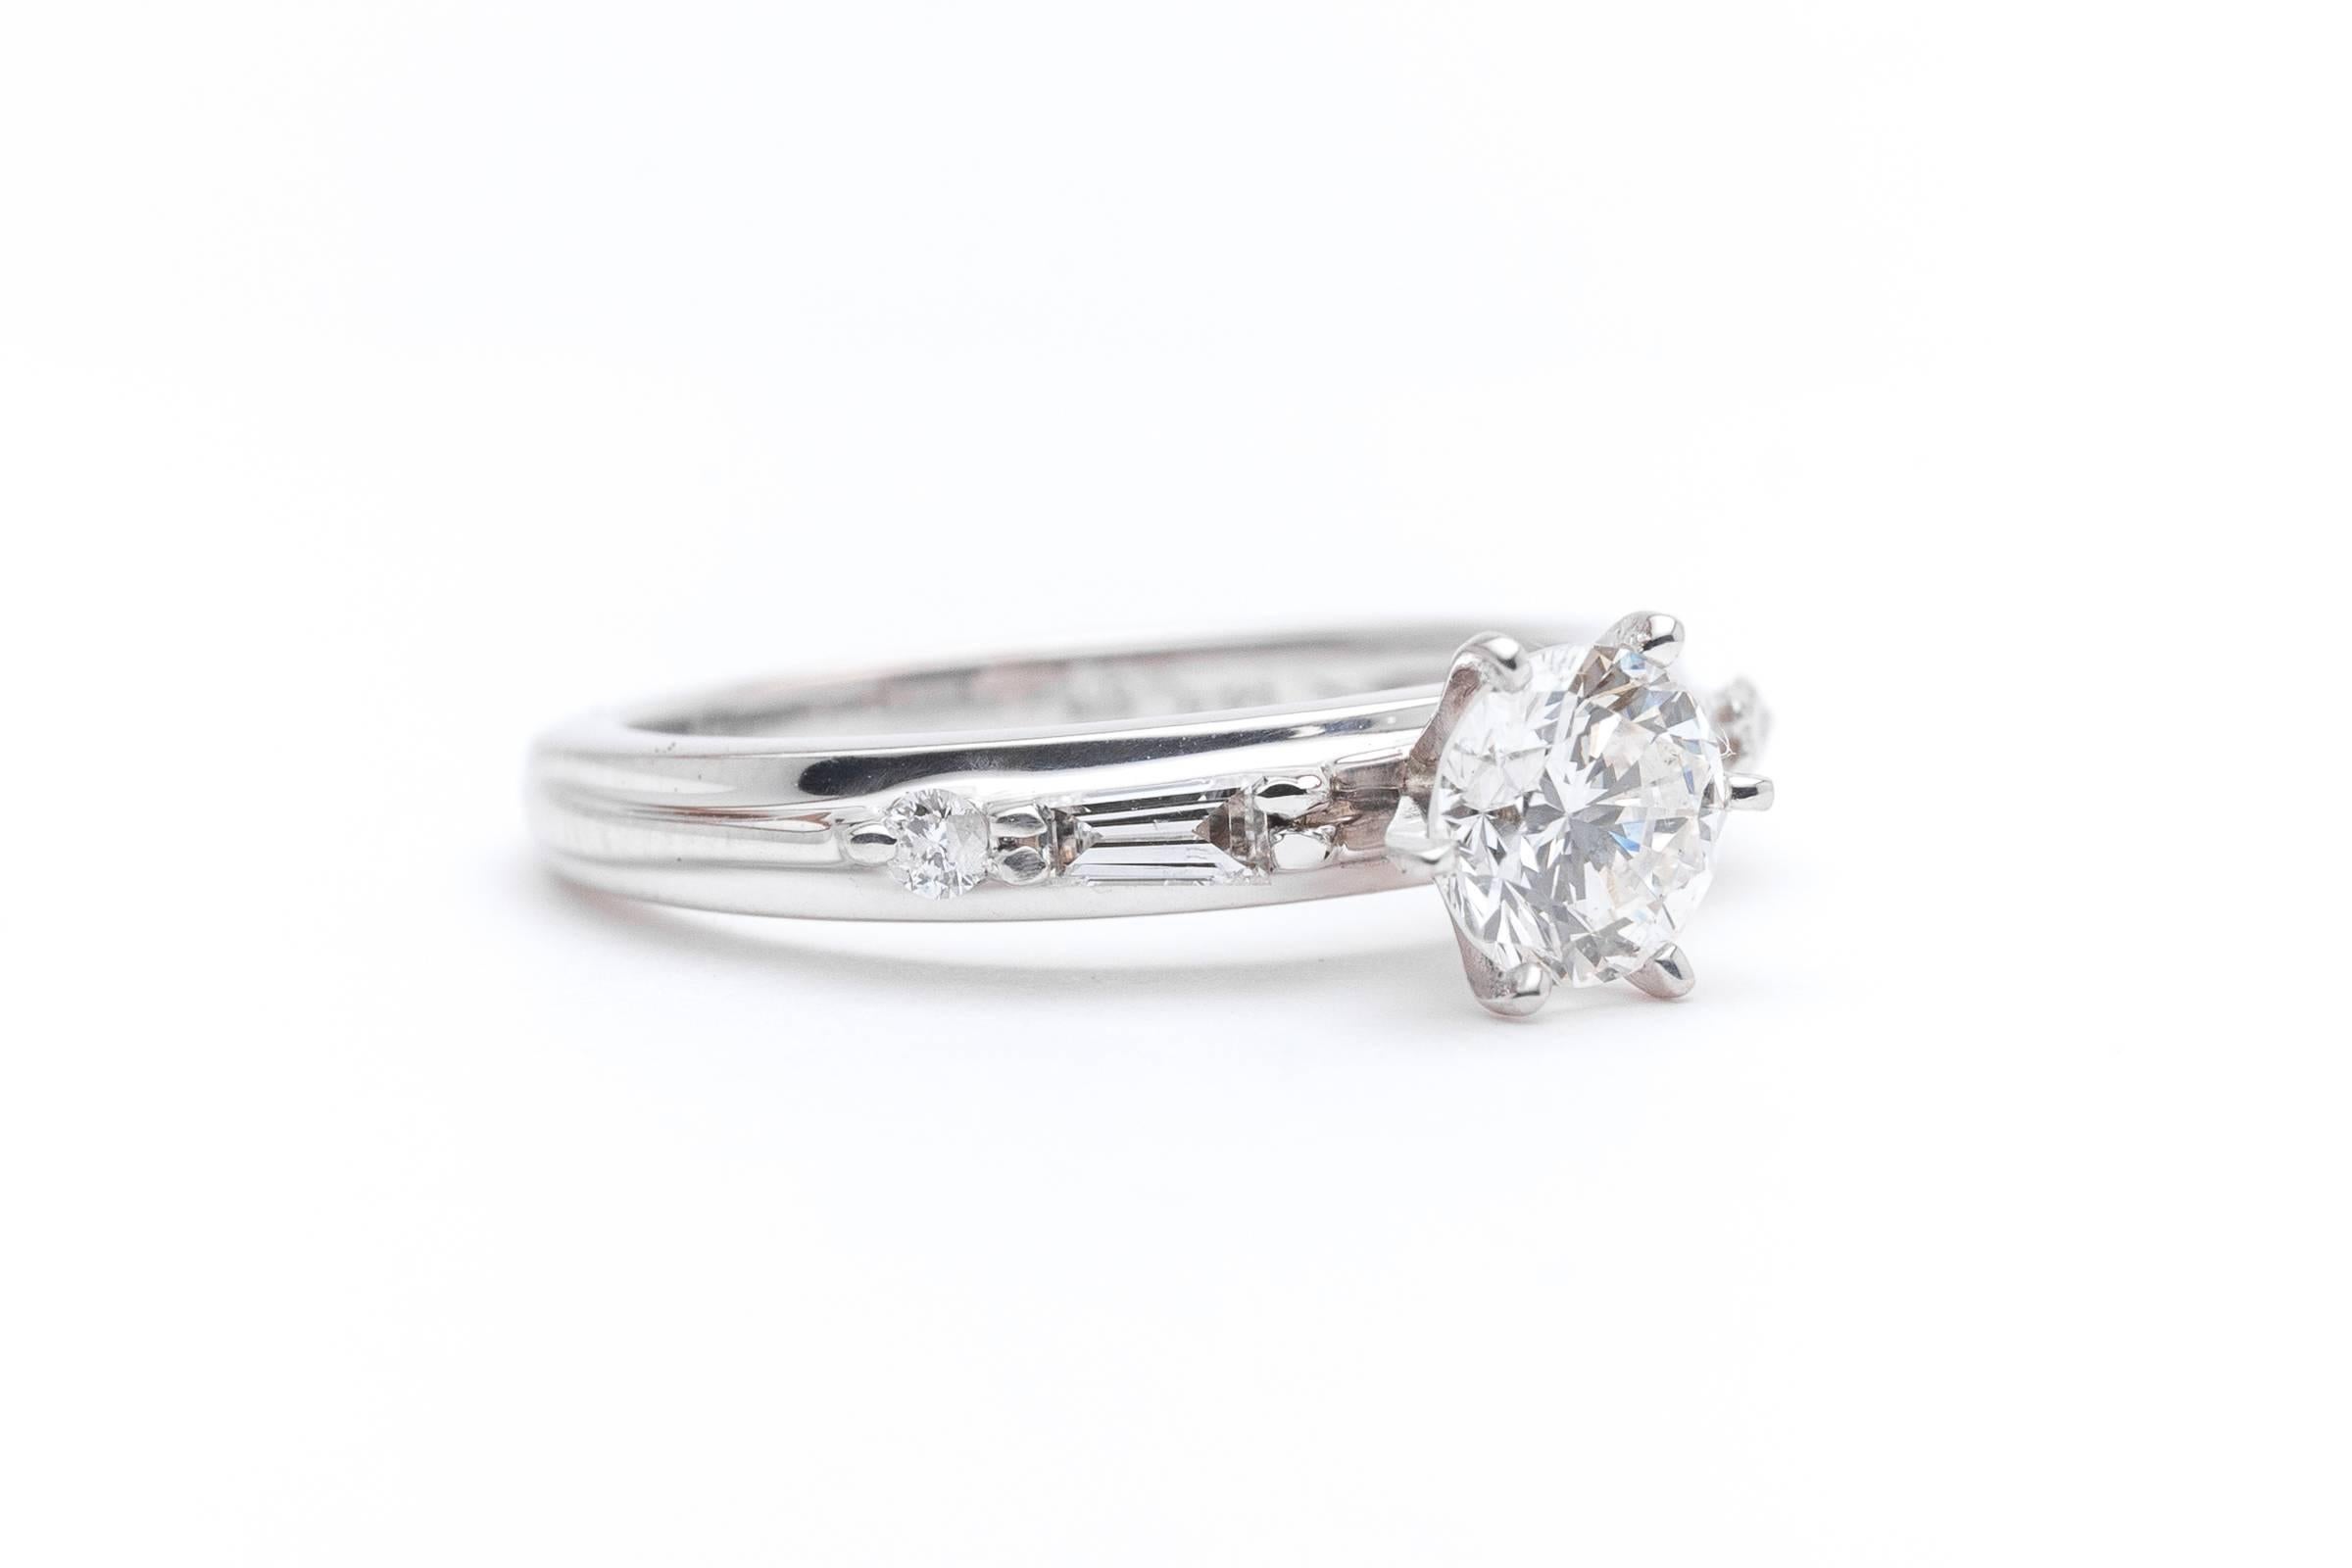 A timeless contemporary diamond engagement ring suite in 14 karat white gold. Centered by a 0.75 carat round brilliant cut diamond this ring features accenting baguette and brilliant cut diamonds along with a matching white gold wedding